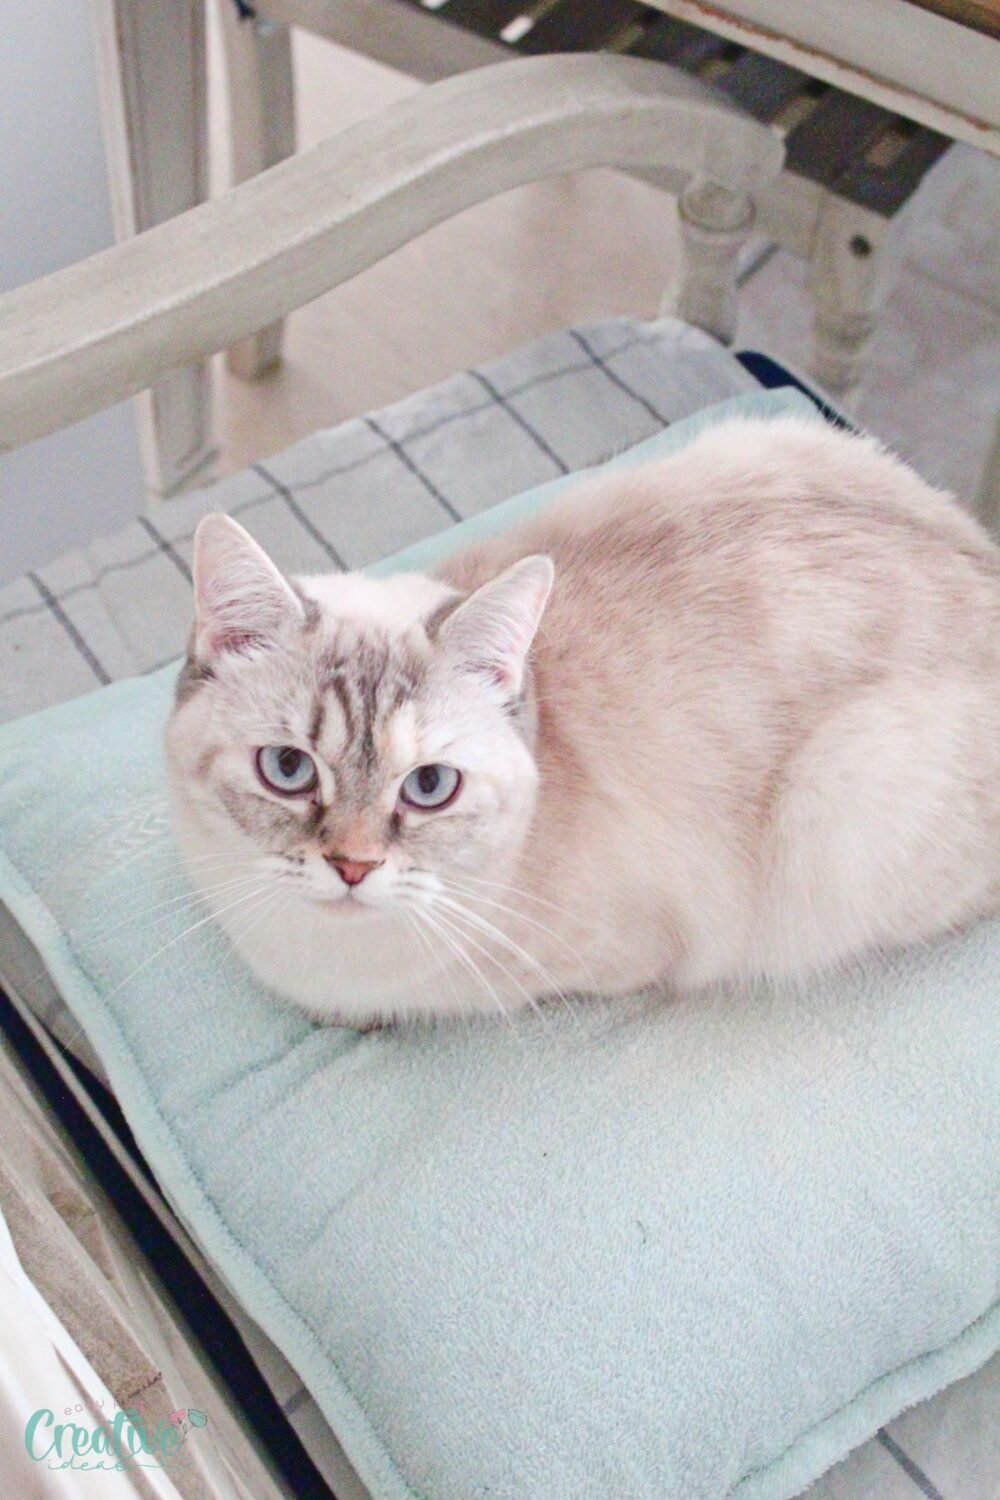 Create a comfortable cat bed using a towel. Sew one within 10 minutes by following these simple instructions